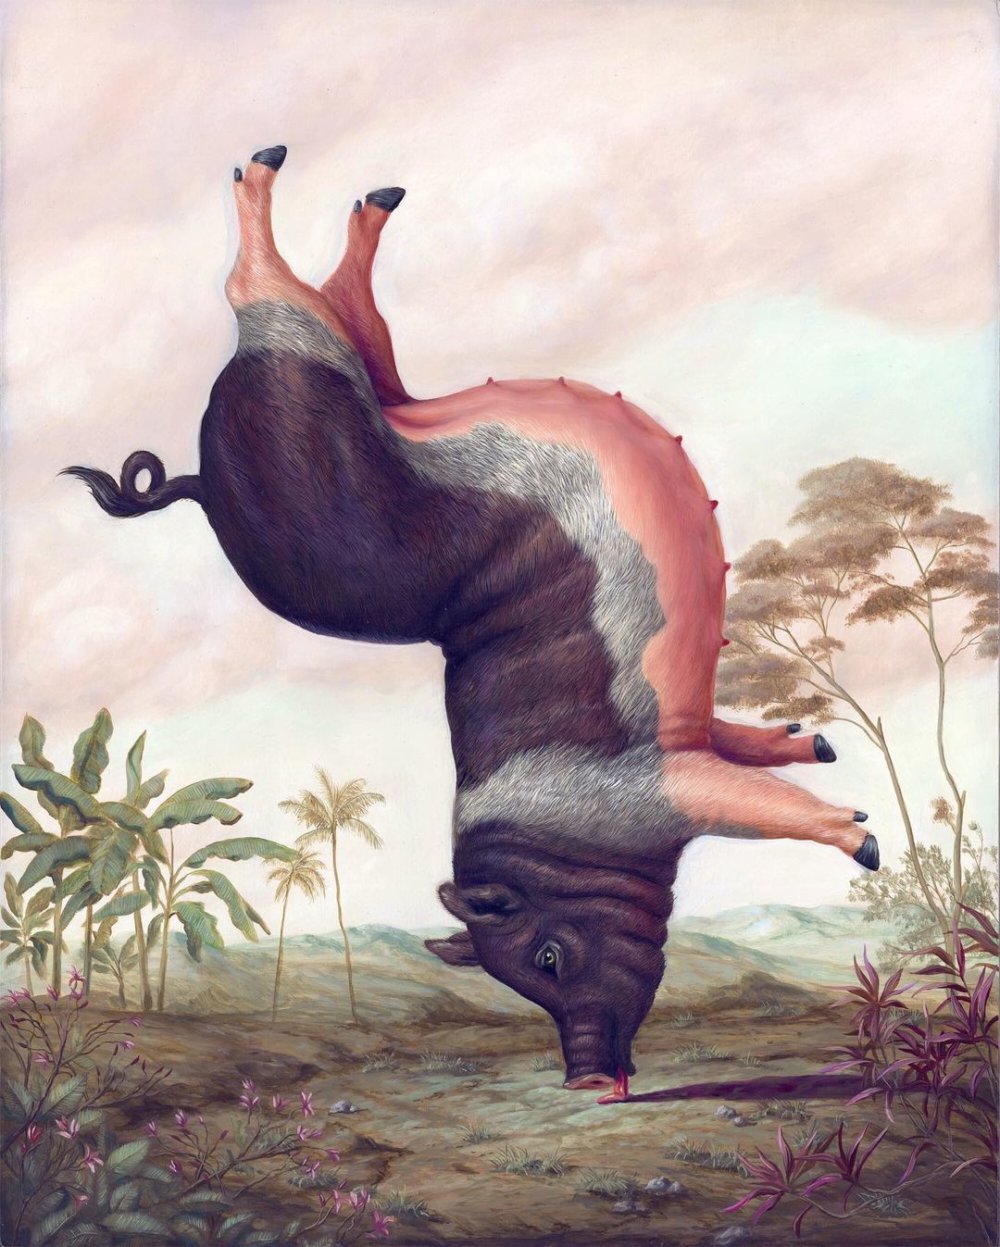 Attachment: The Absurdly Distorted And Twisted Animal Paintings Of Bruno  Pontiroli 1 — Visualflood: Your Daily-Inspiration Source